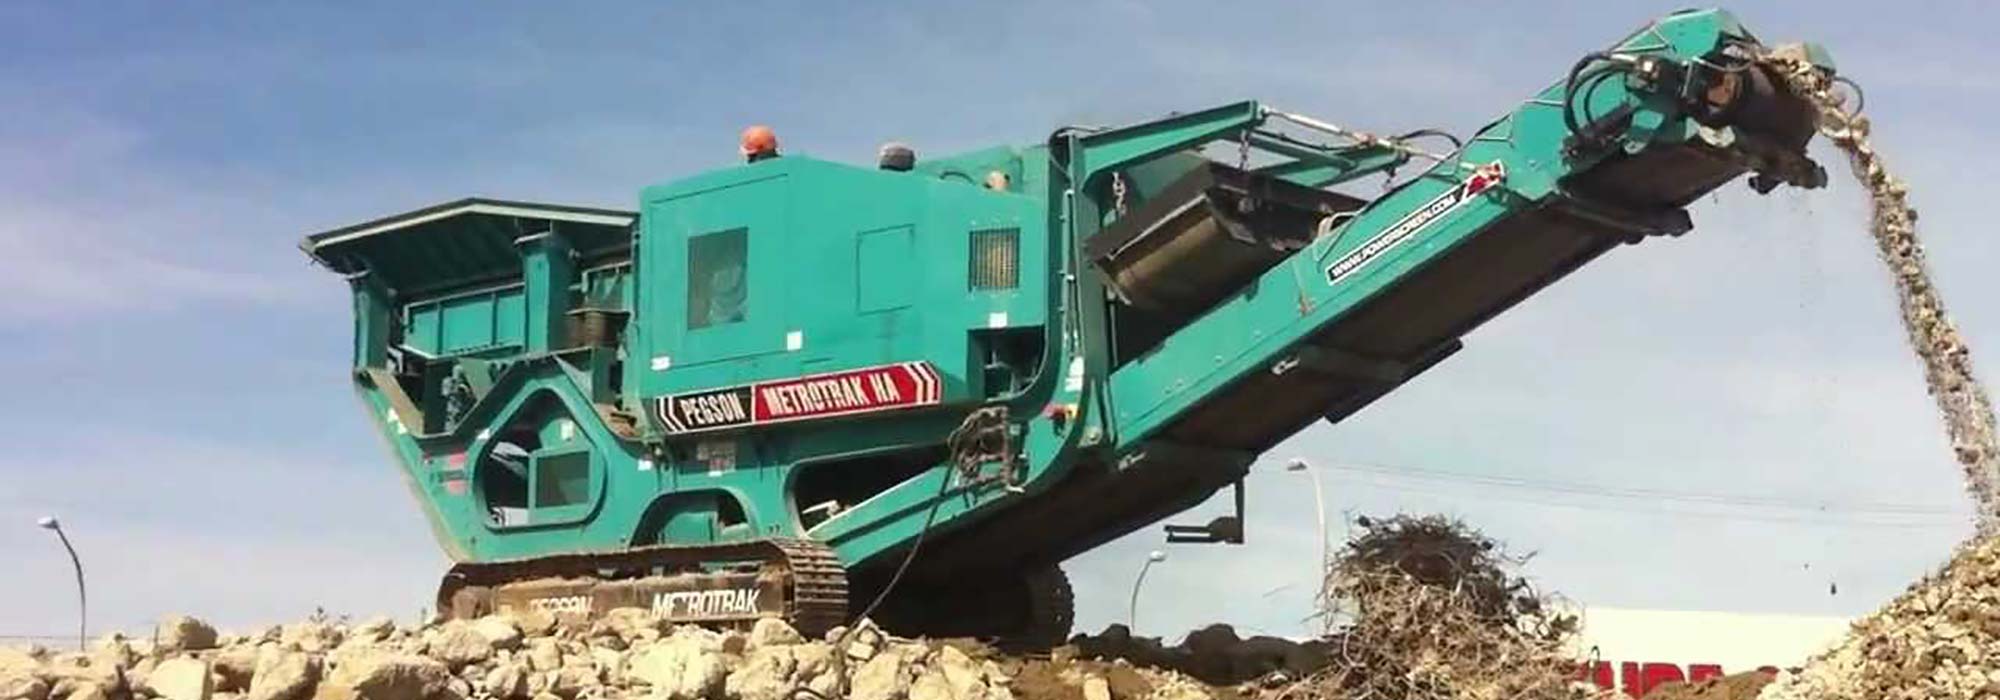 Concrete Crushing — Services — Dockerill Group